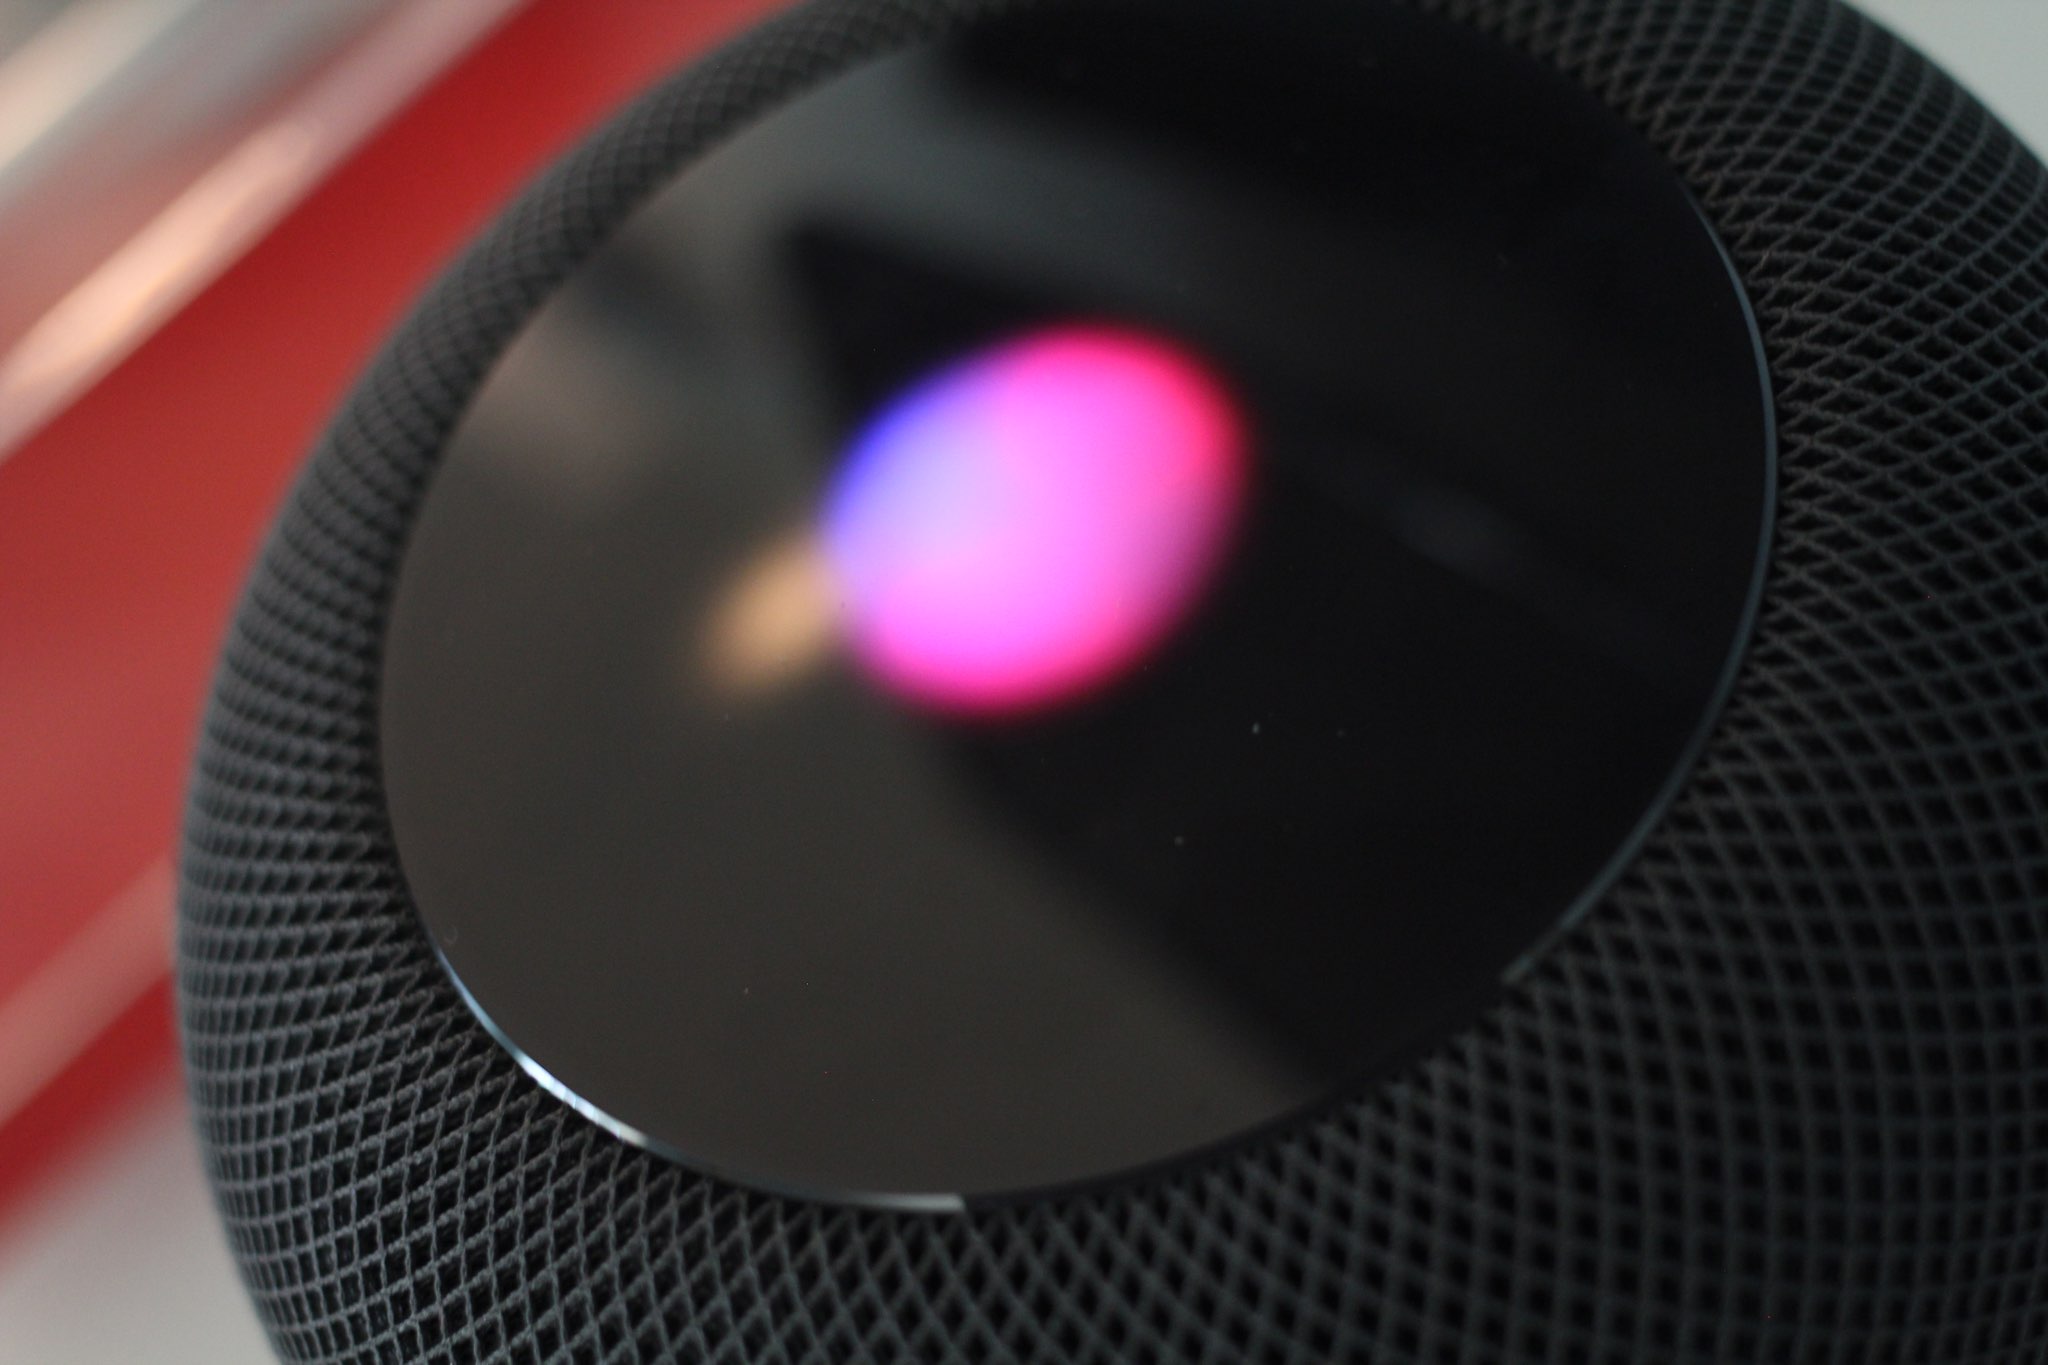 HomePod with purple light on its touch pad